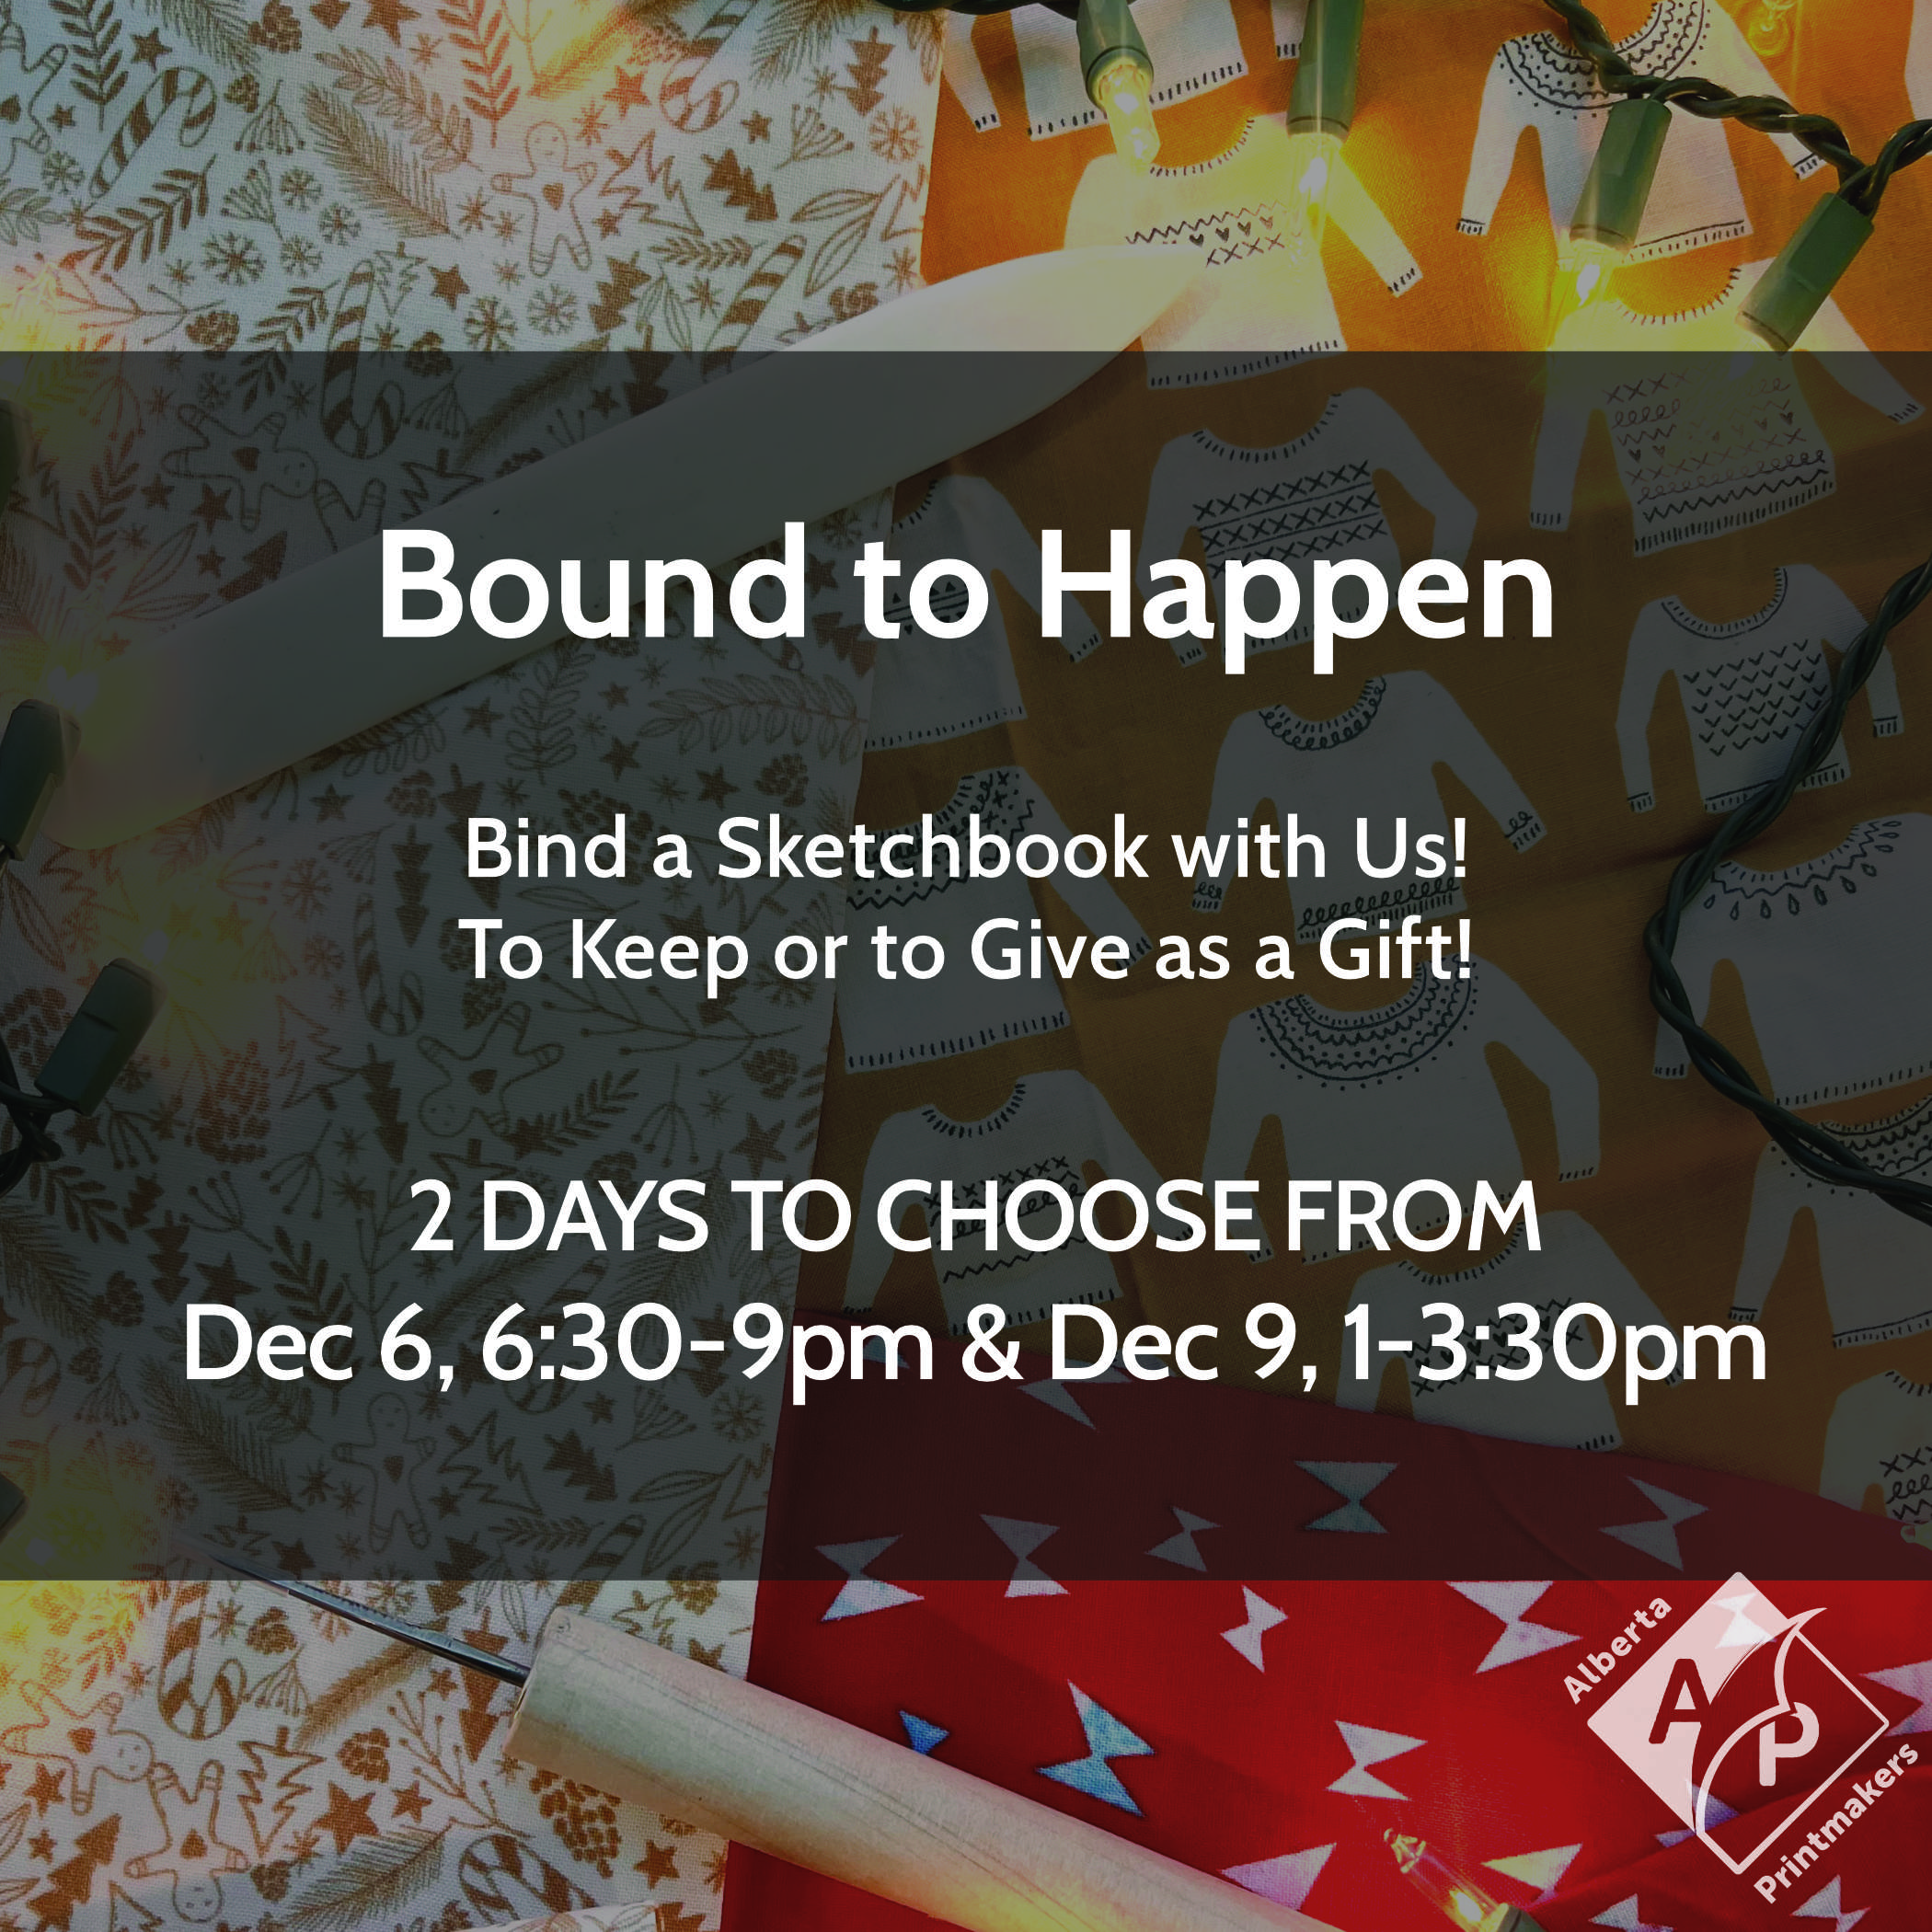 Bound to Happen | Bind a Sketchbook with us! To Keep or to give as a gift! | 2 Days to choose from | Dec 6, 6:30 - 9pm & Dec 9, 1 - 3:30pm